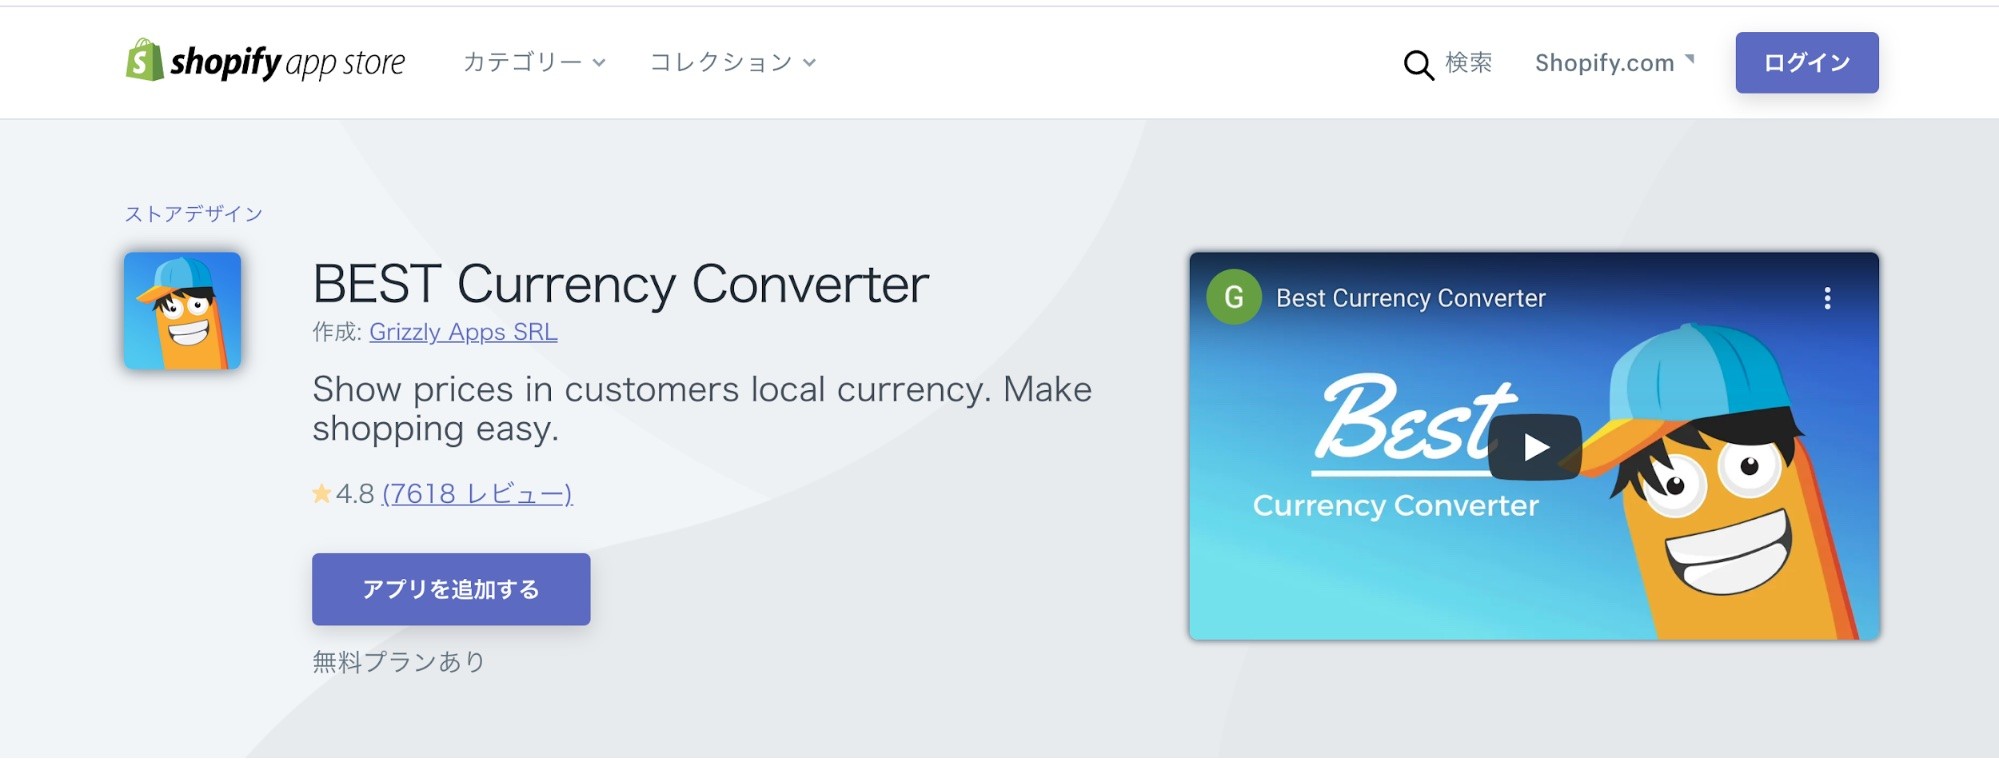 BEST Currency Converter